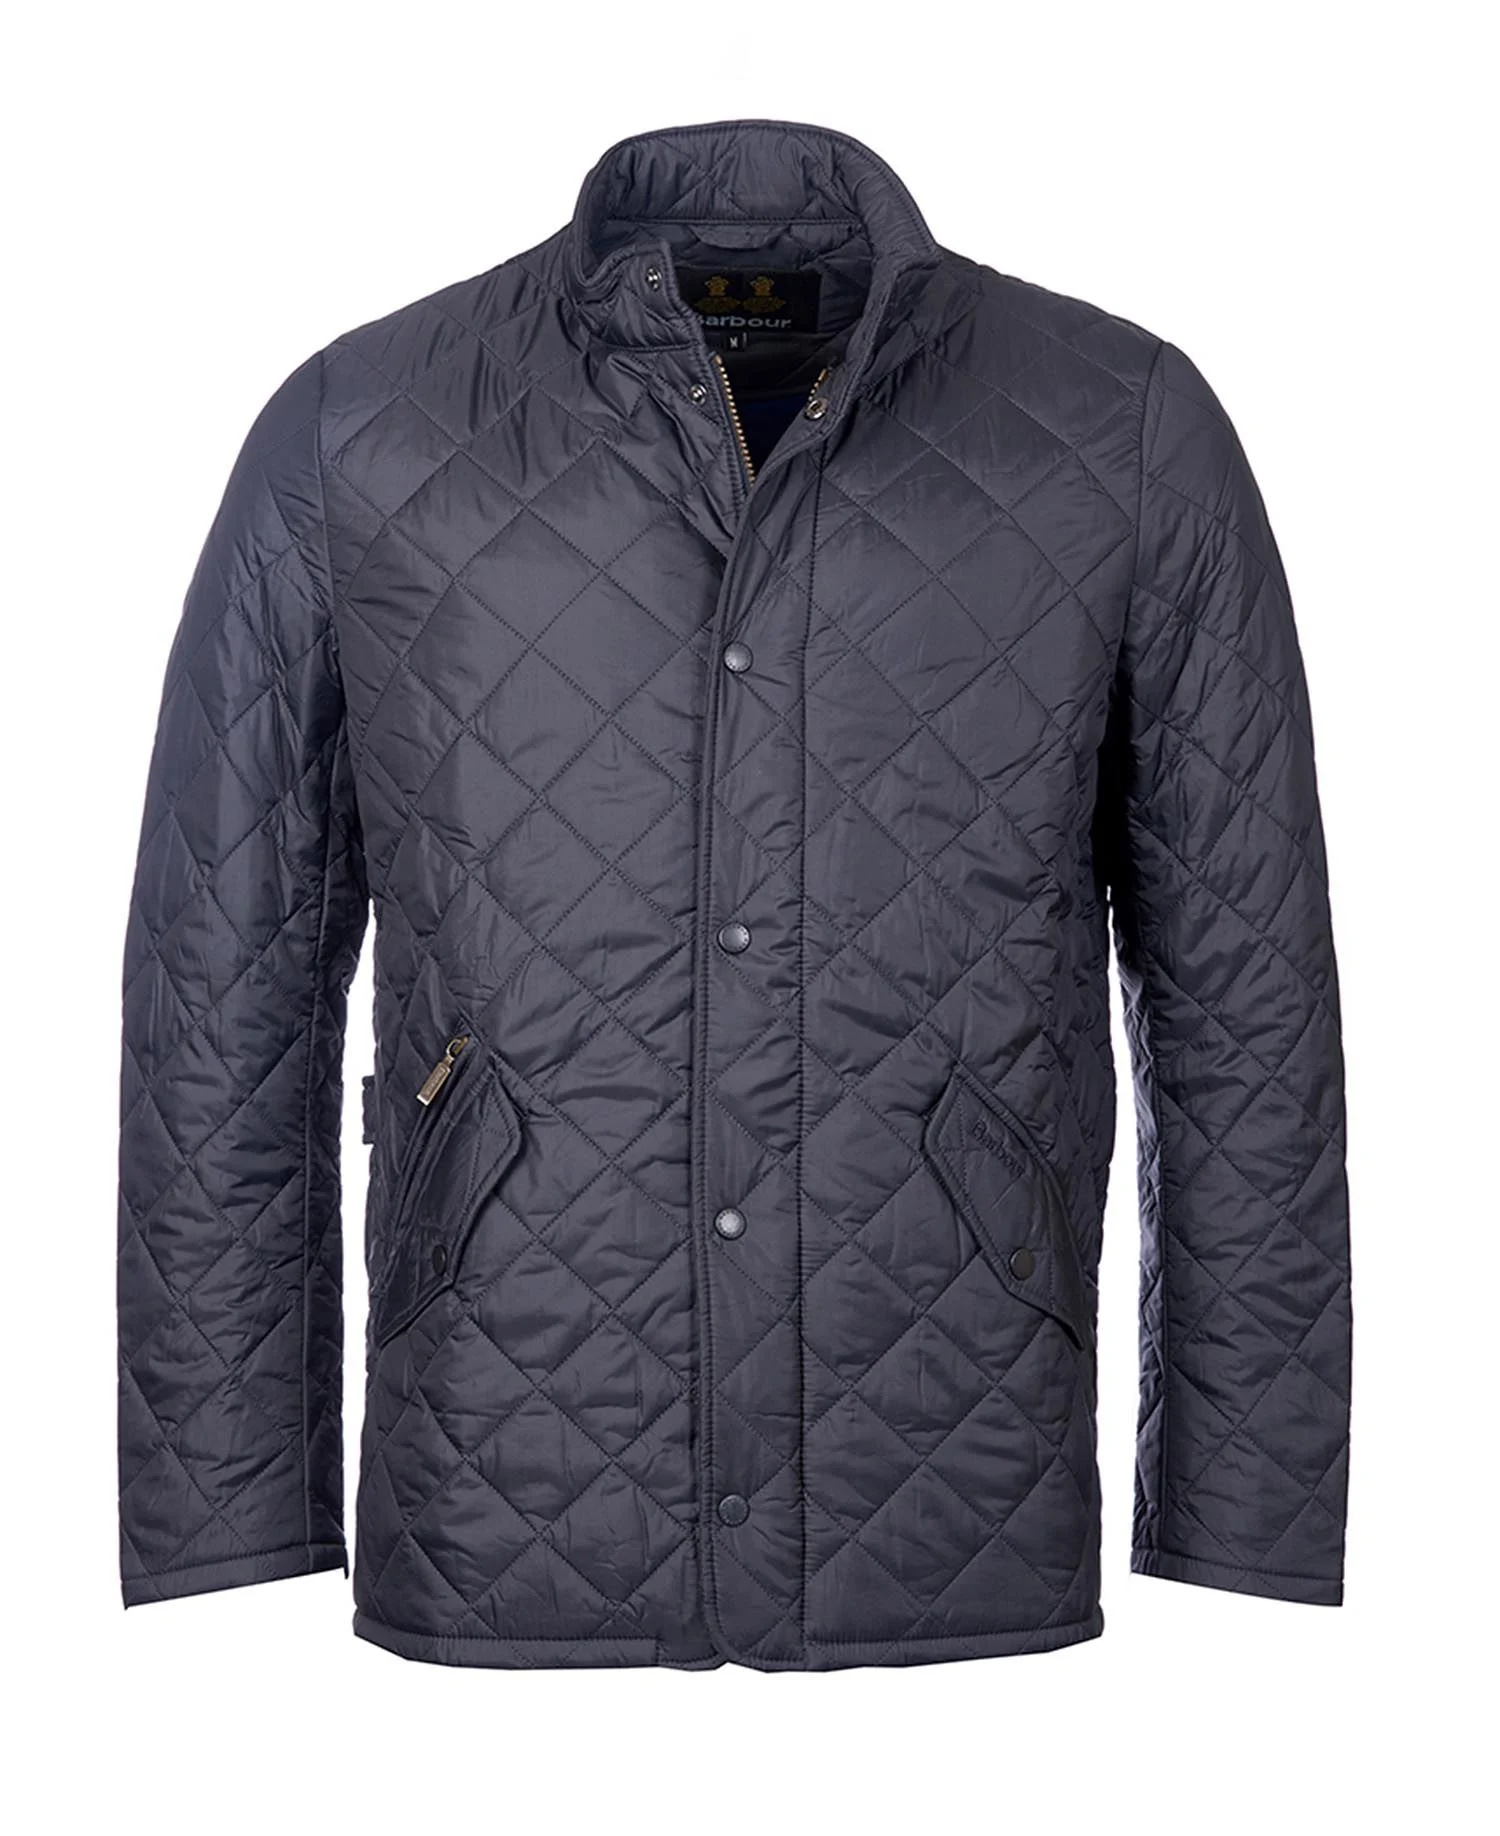 Barbour x Brompton Reversible Fold Quilted Jacket   My Country